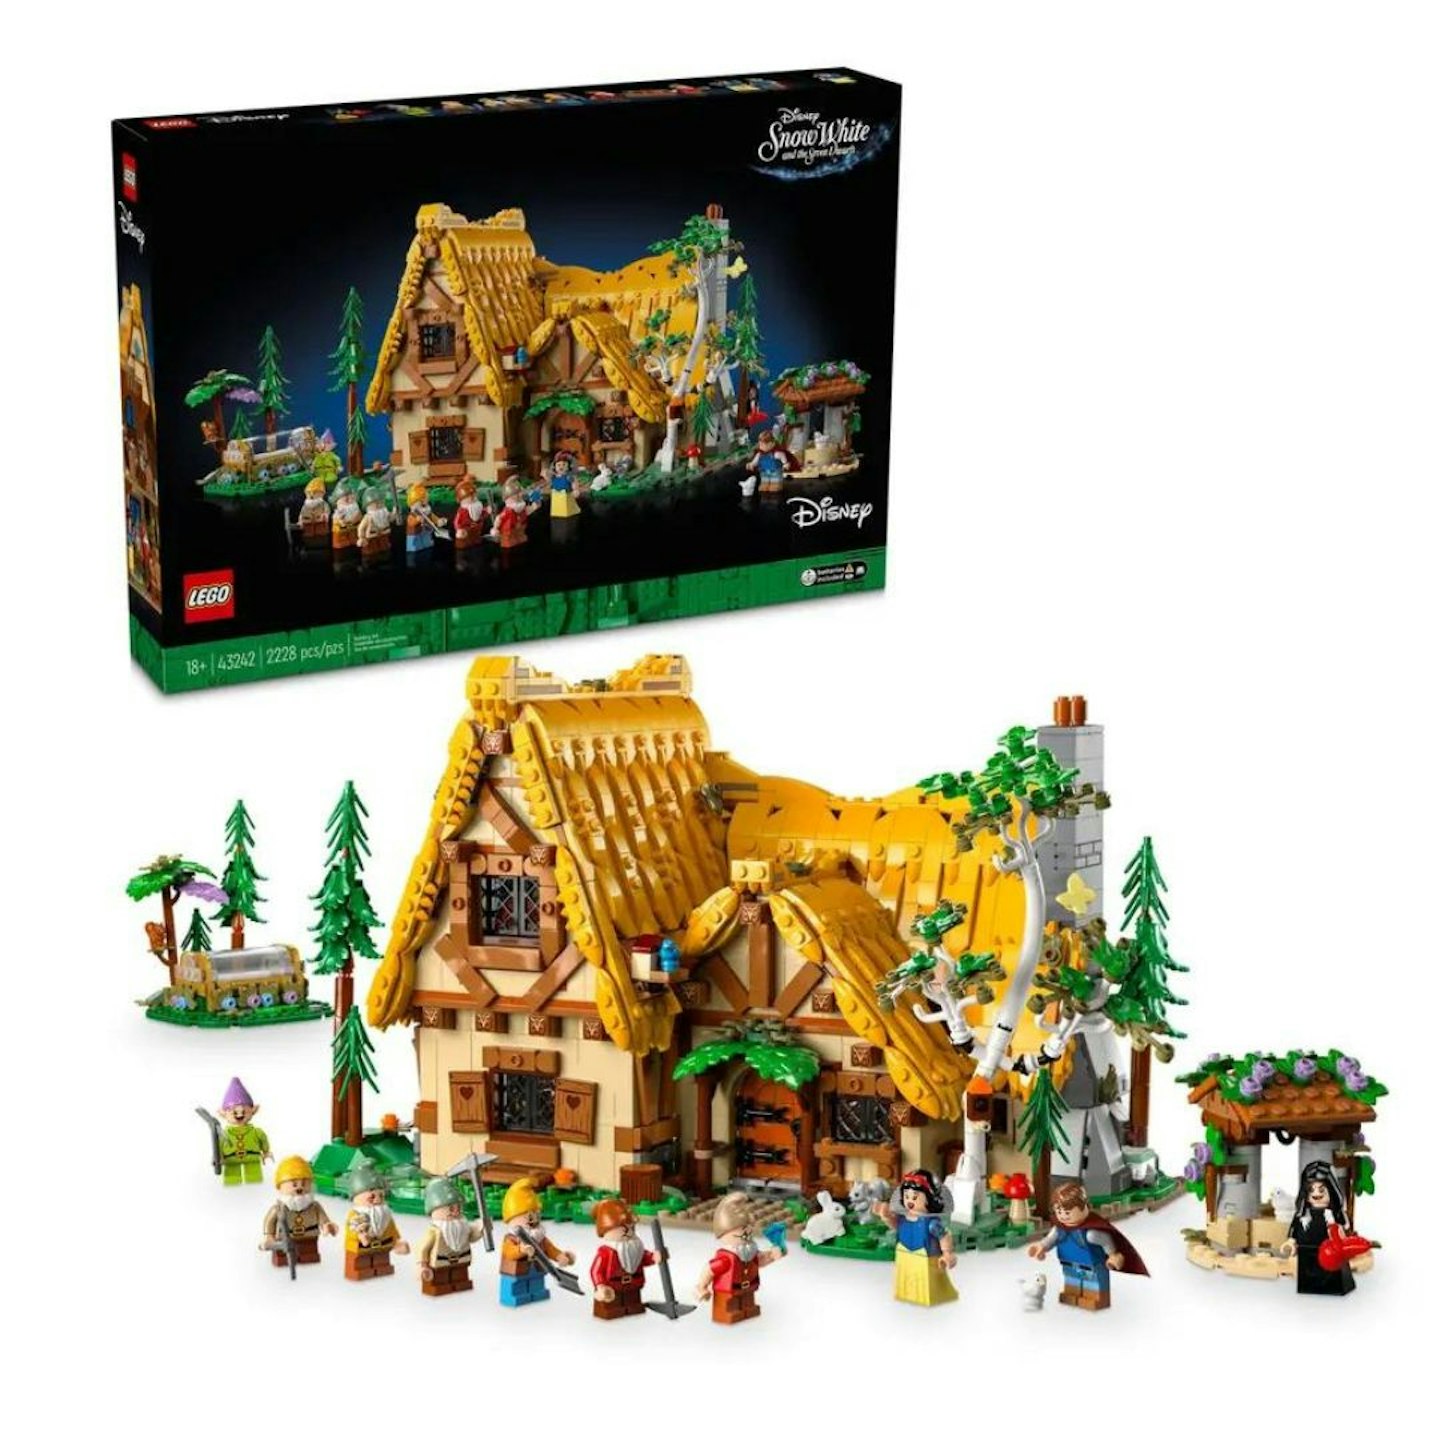 The best LEGO sets for adults: Snow White and the Seven Dwarfs' Cottage